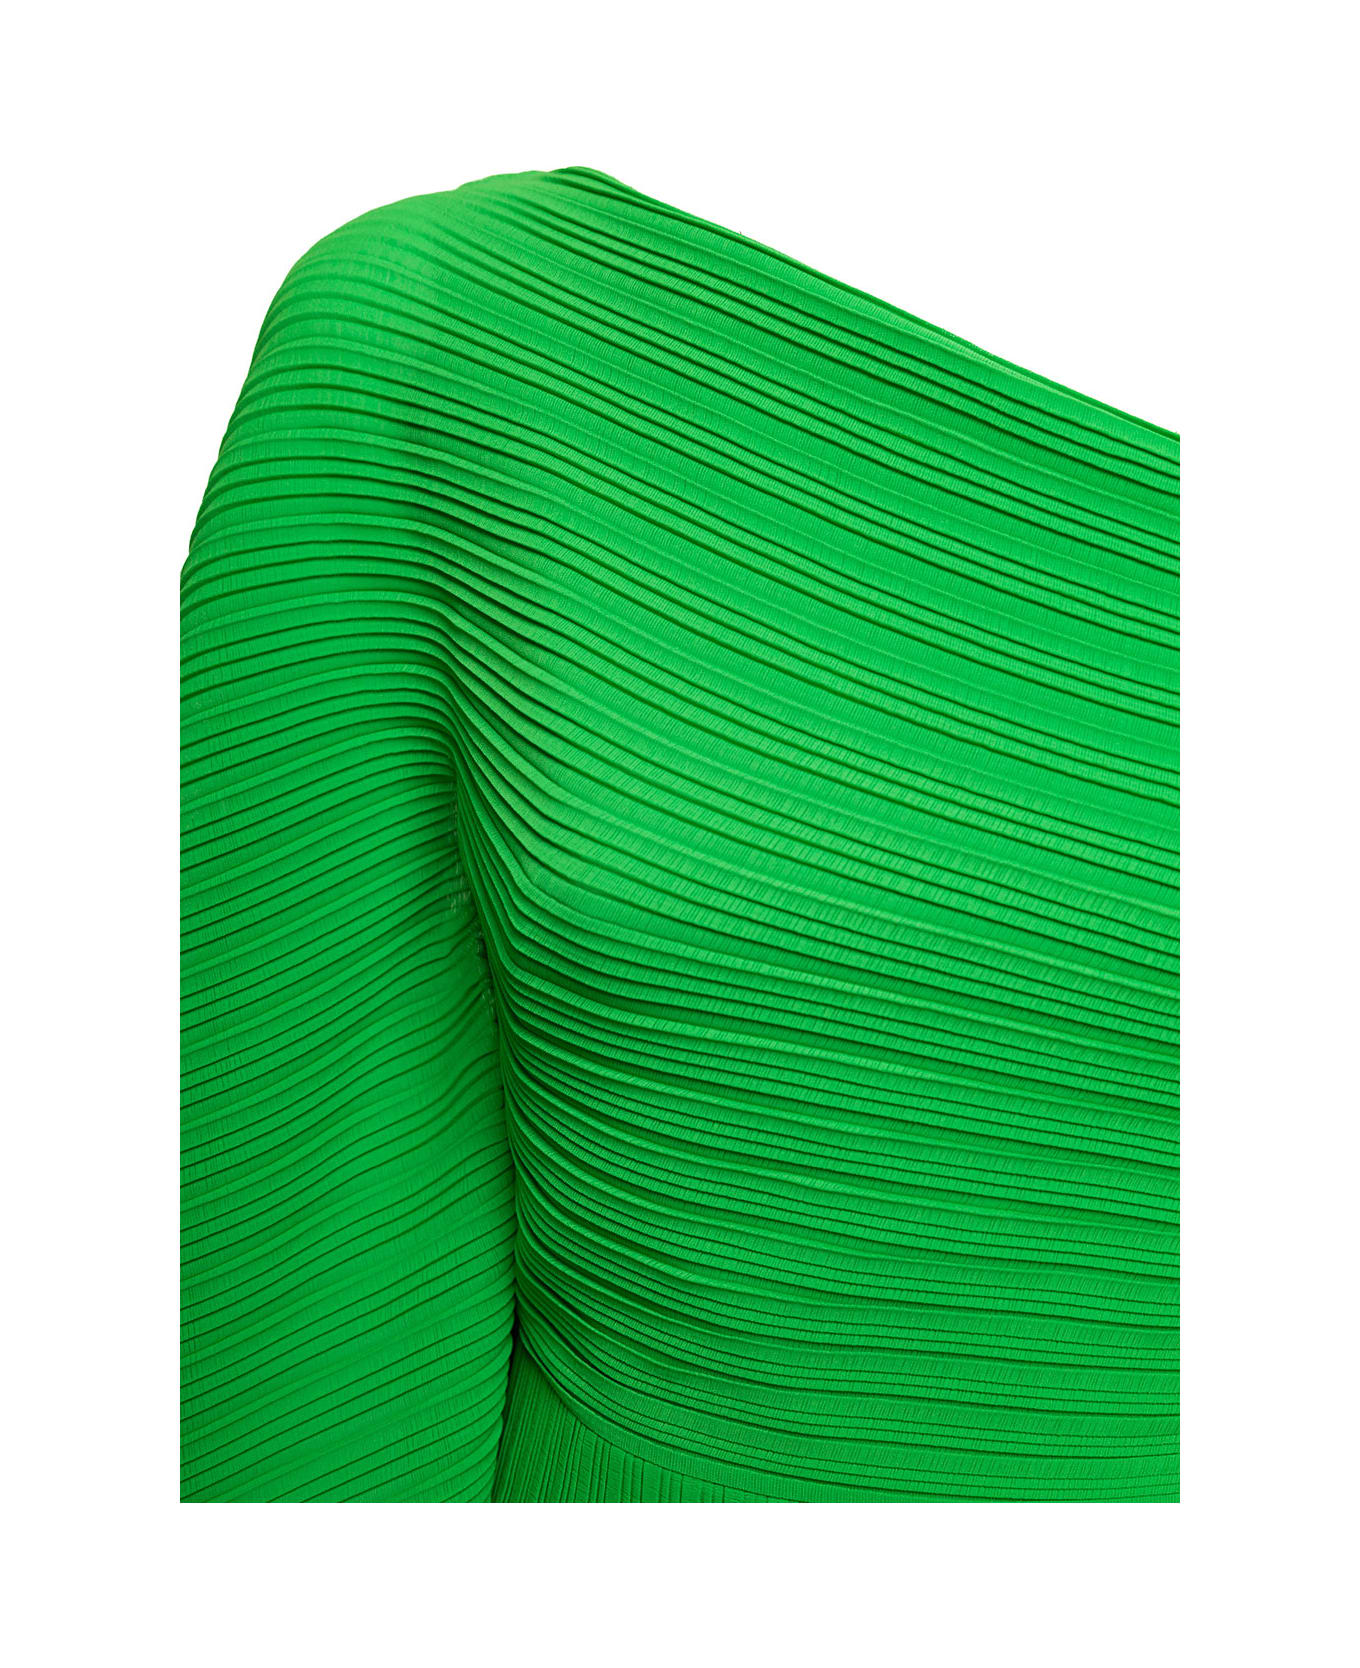 Solace London 'lenna' Midi Green One-shoulder Dress In Pleated Fabric Woman - Green ワンピース＆ドレス